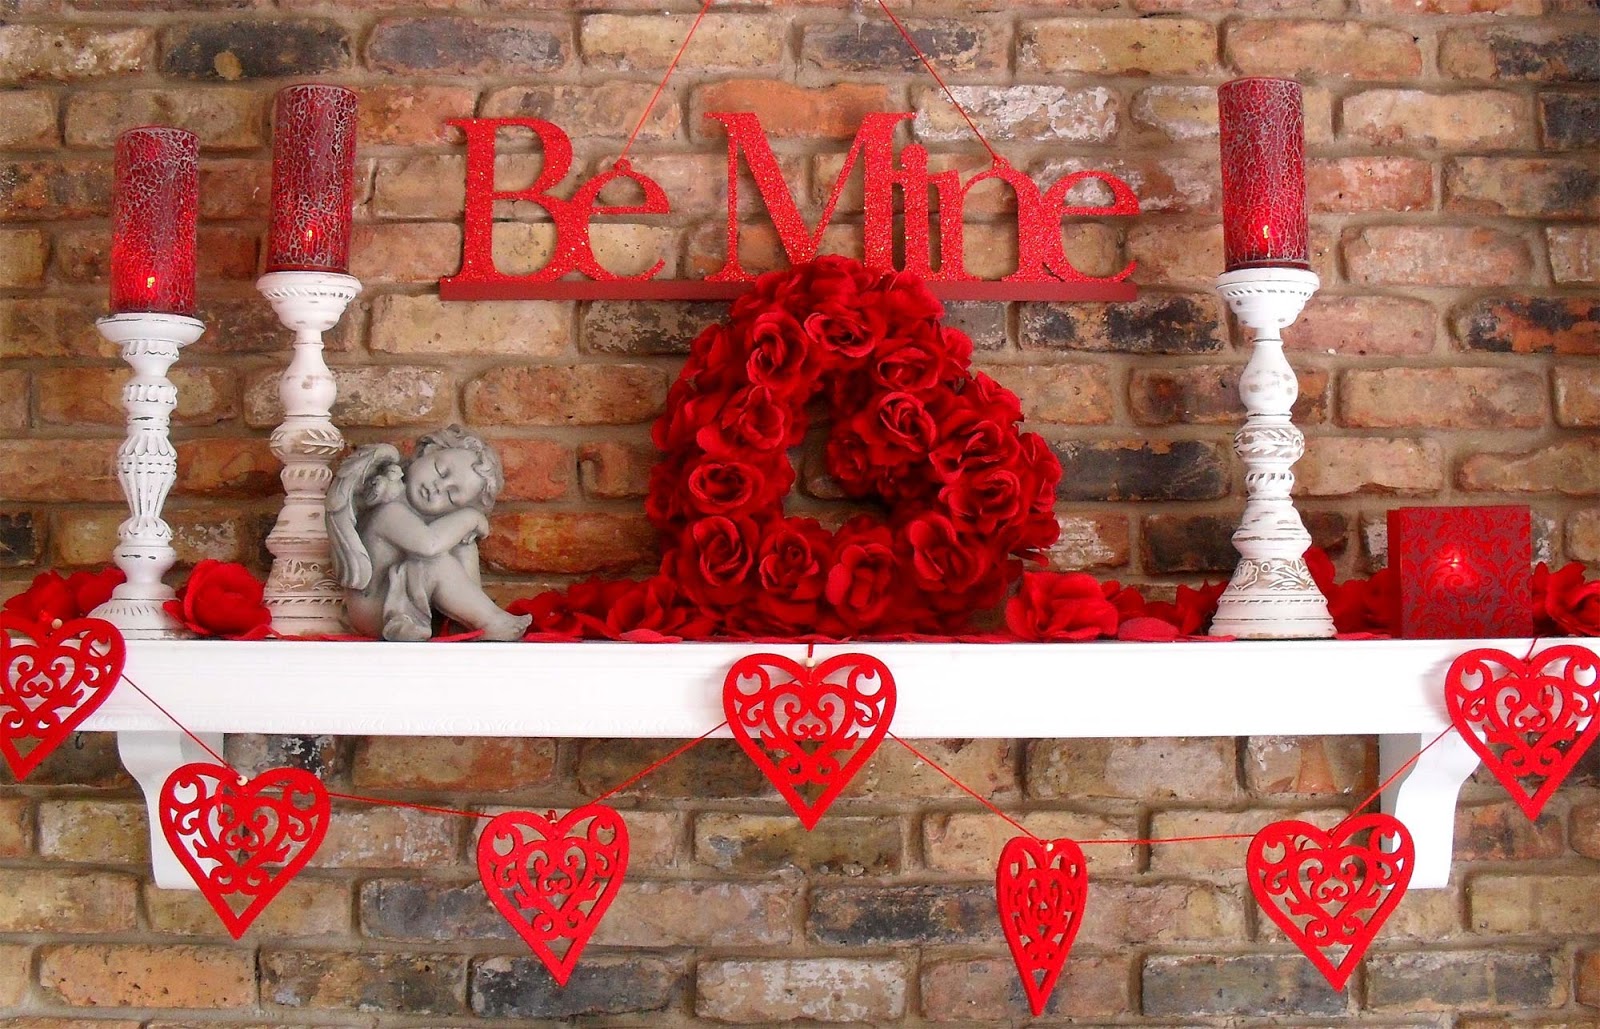 Valentine's Day decor with red hearts on a brick mantel.